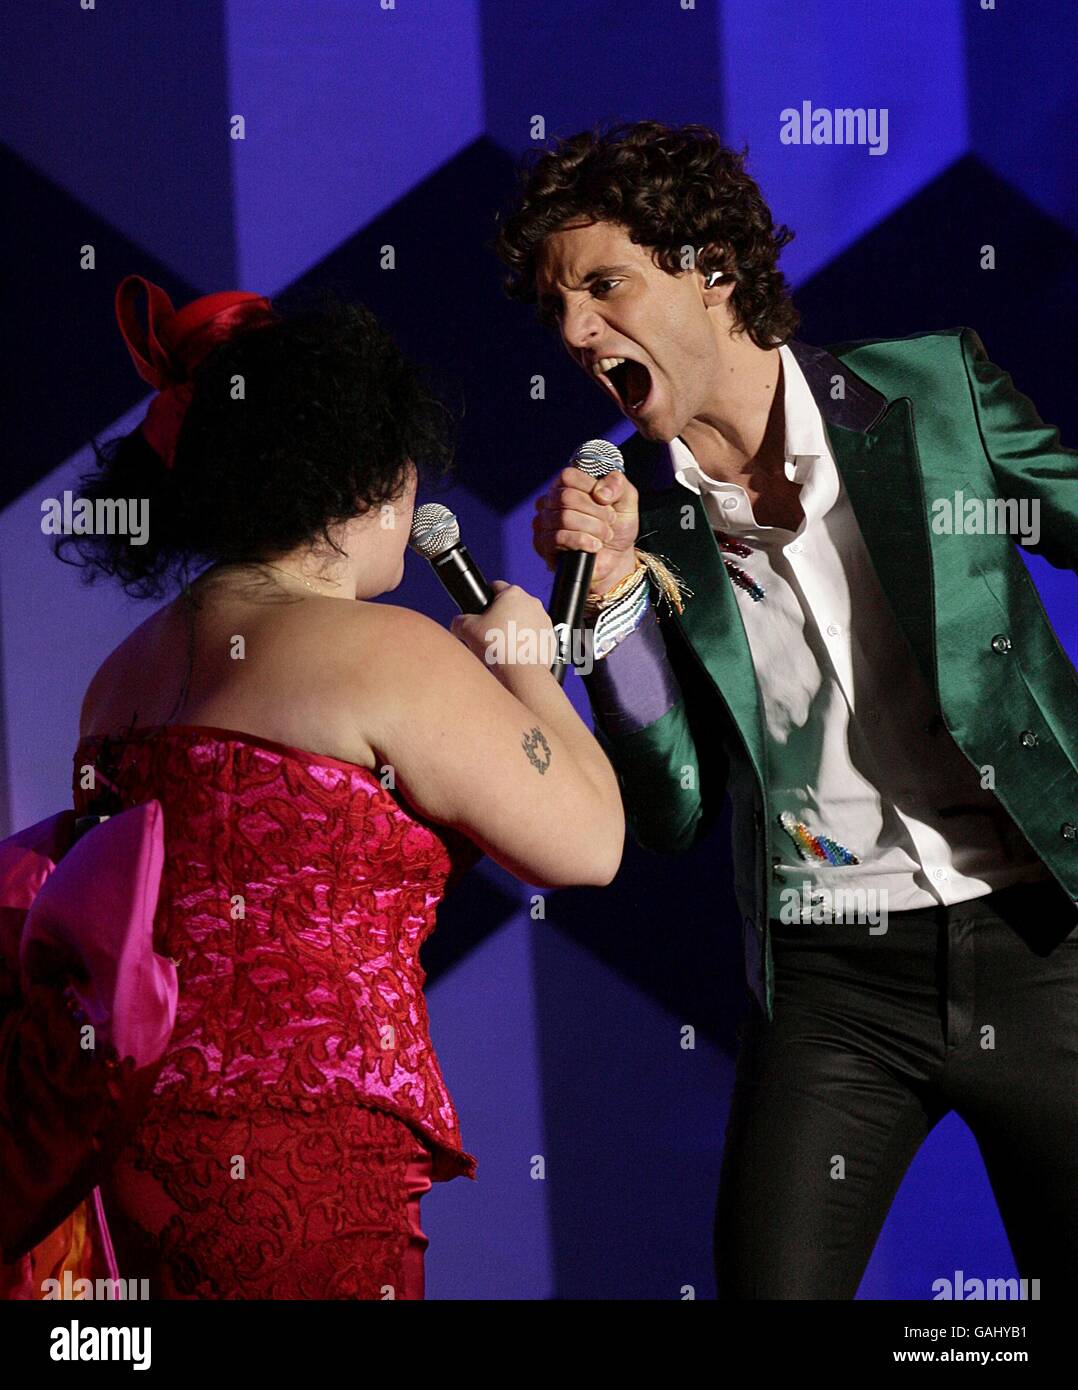 Mika performs on stage with Beth Ditto, during the BRIT Awards 2008, at Earls Court in central London. Stock Photo